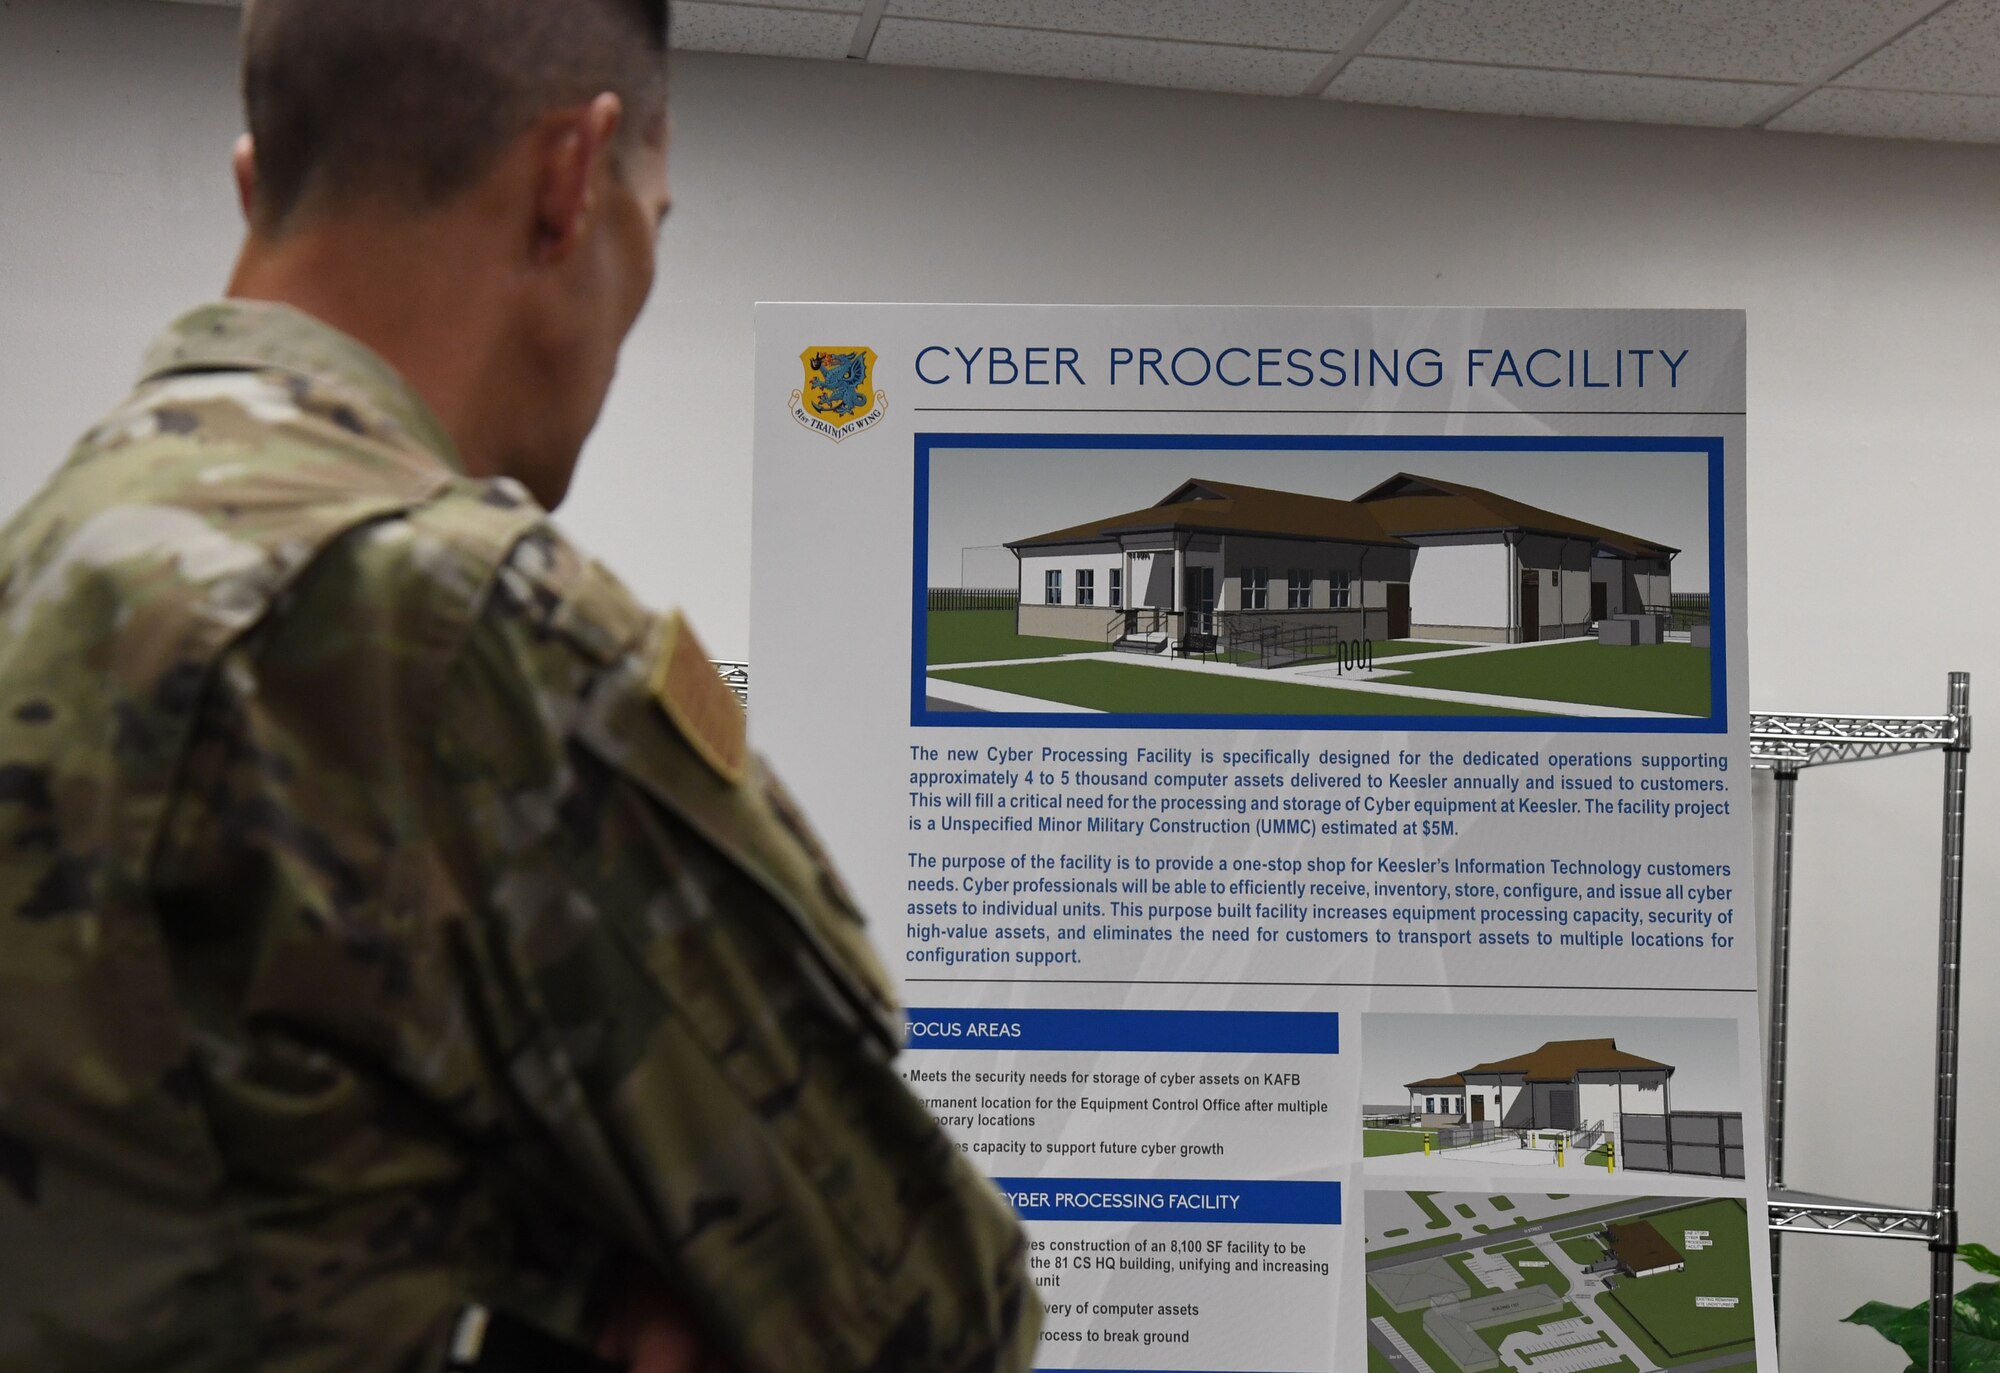 U.S. Air Force Col. Billy Pope, 81st Training Wing commander, views the 81st Communications Squadron's cyber processing facility overview display board during the 81st Mission Support Group Immersion Tour inside the Taylor Logistics Center at Keesler Air Force Base, Mississippi, April 7, 2023.